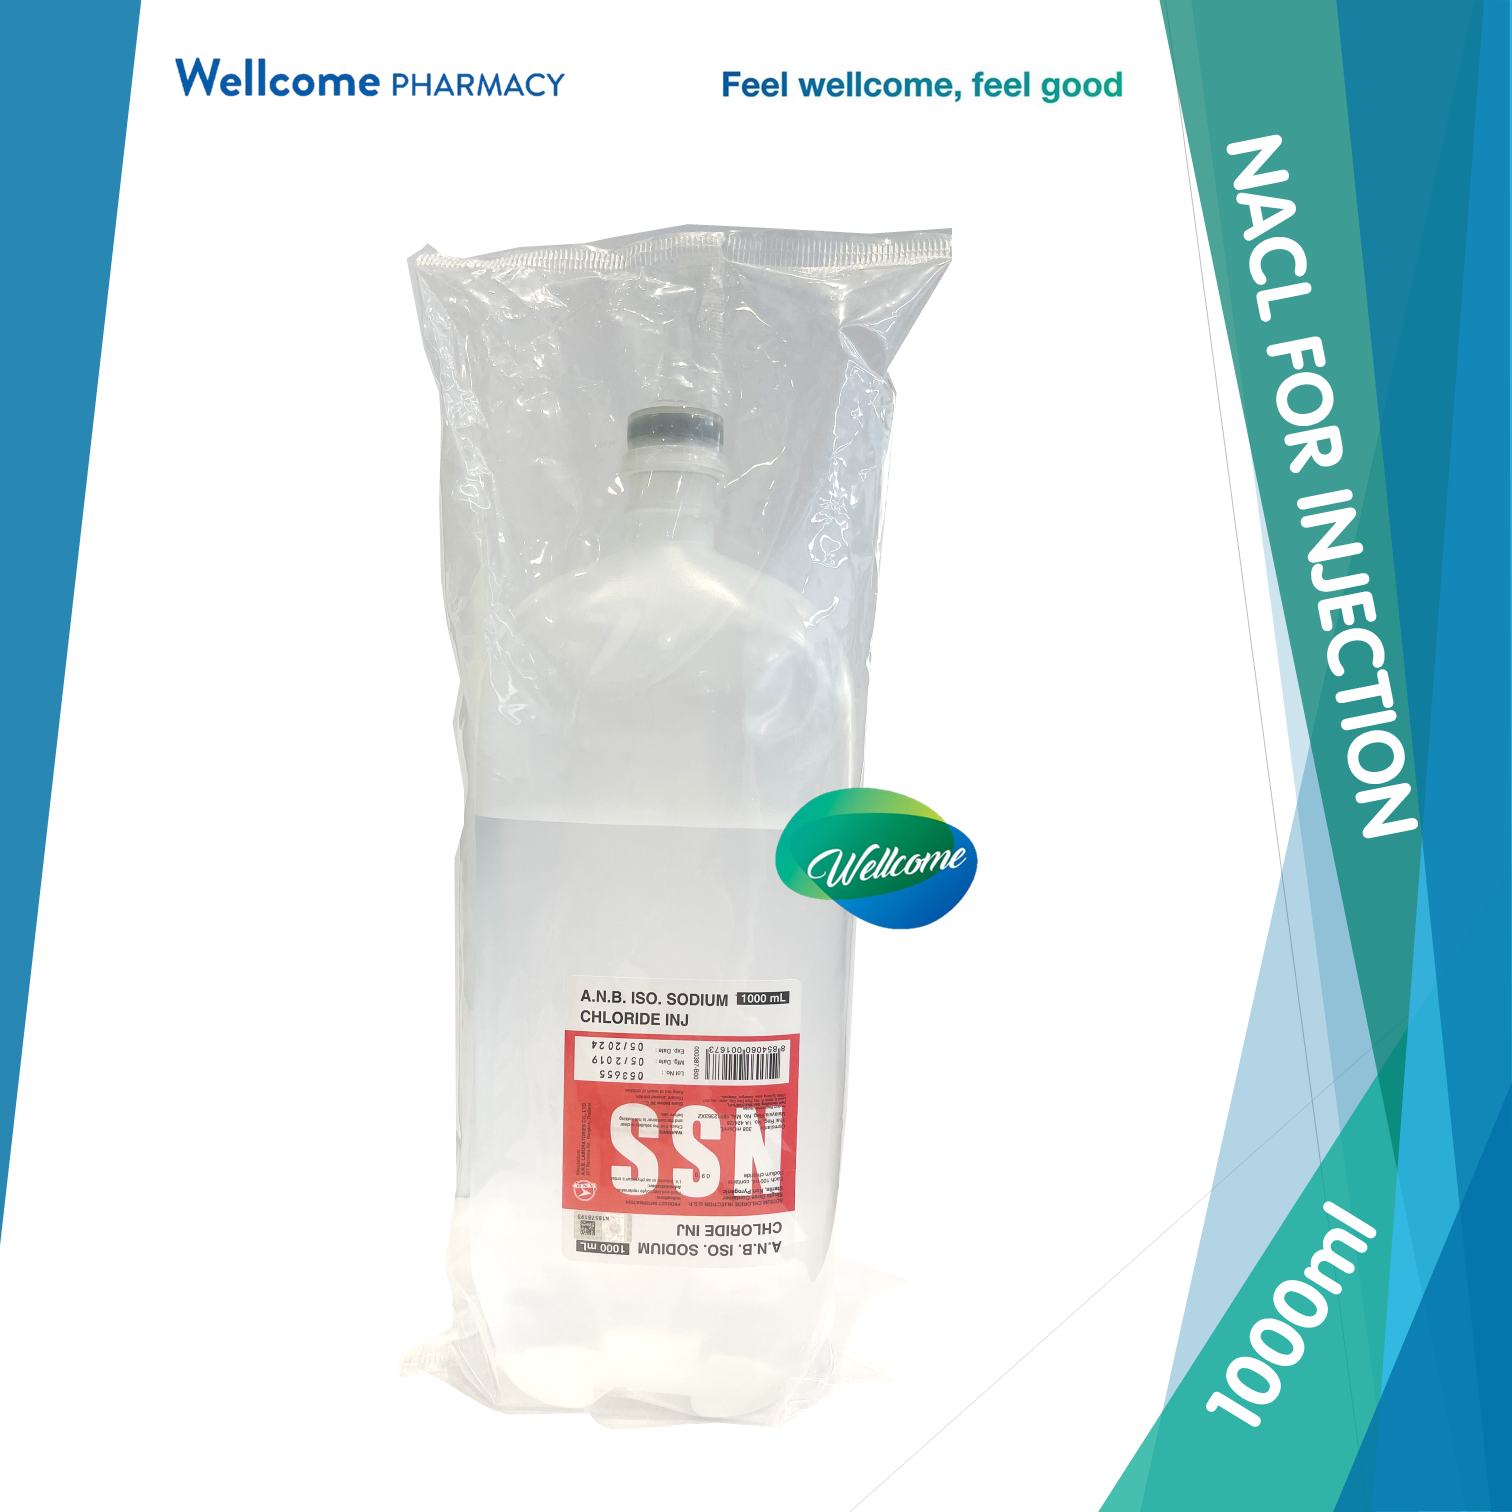 A.N.B Isotonic Normal Saline (Sodium Chloride 0.9% w/v) for Injection - Wellcome Pharmacy